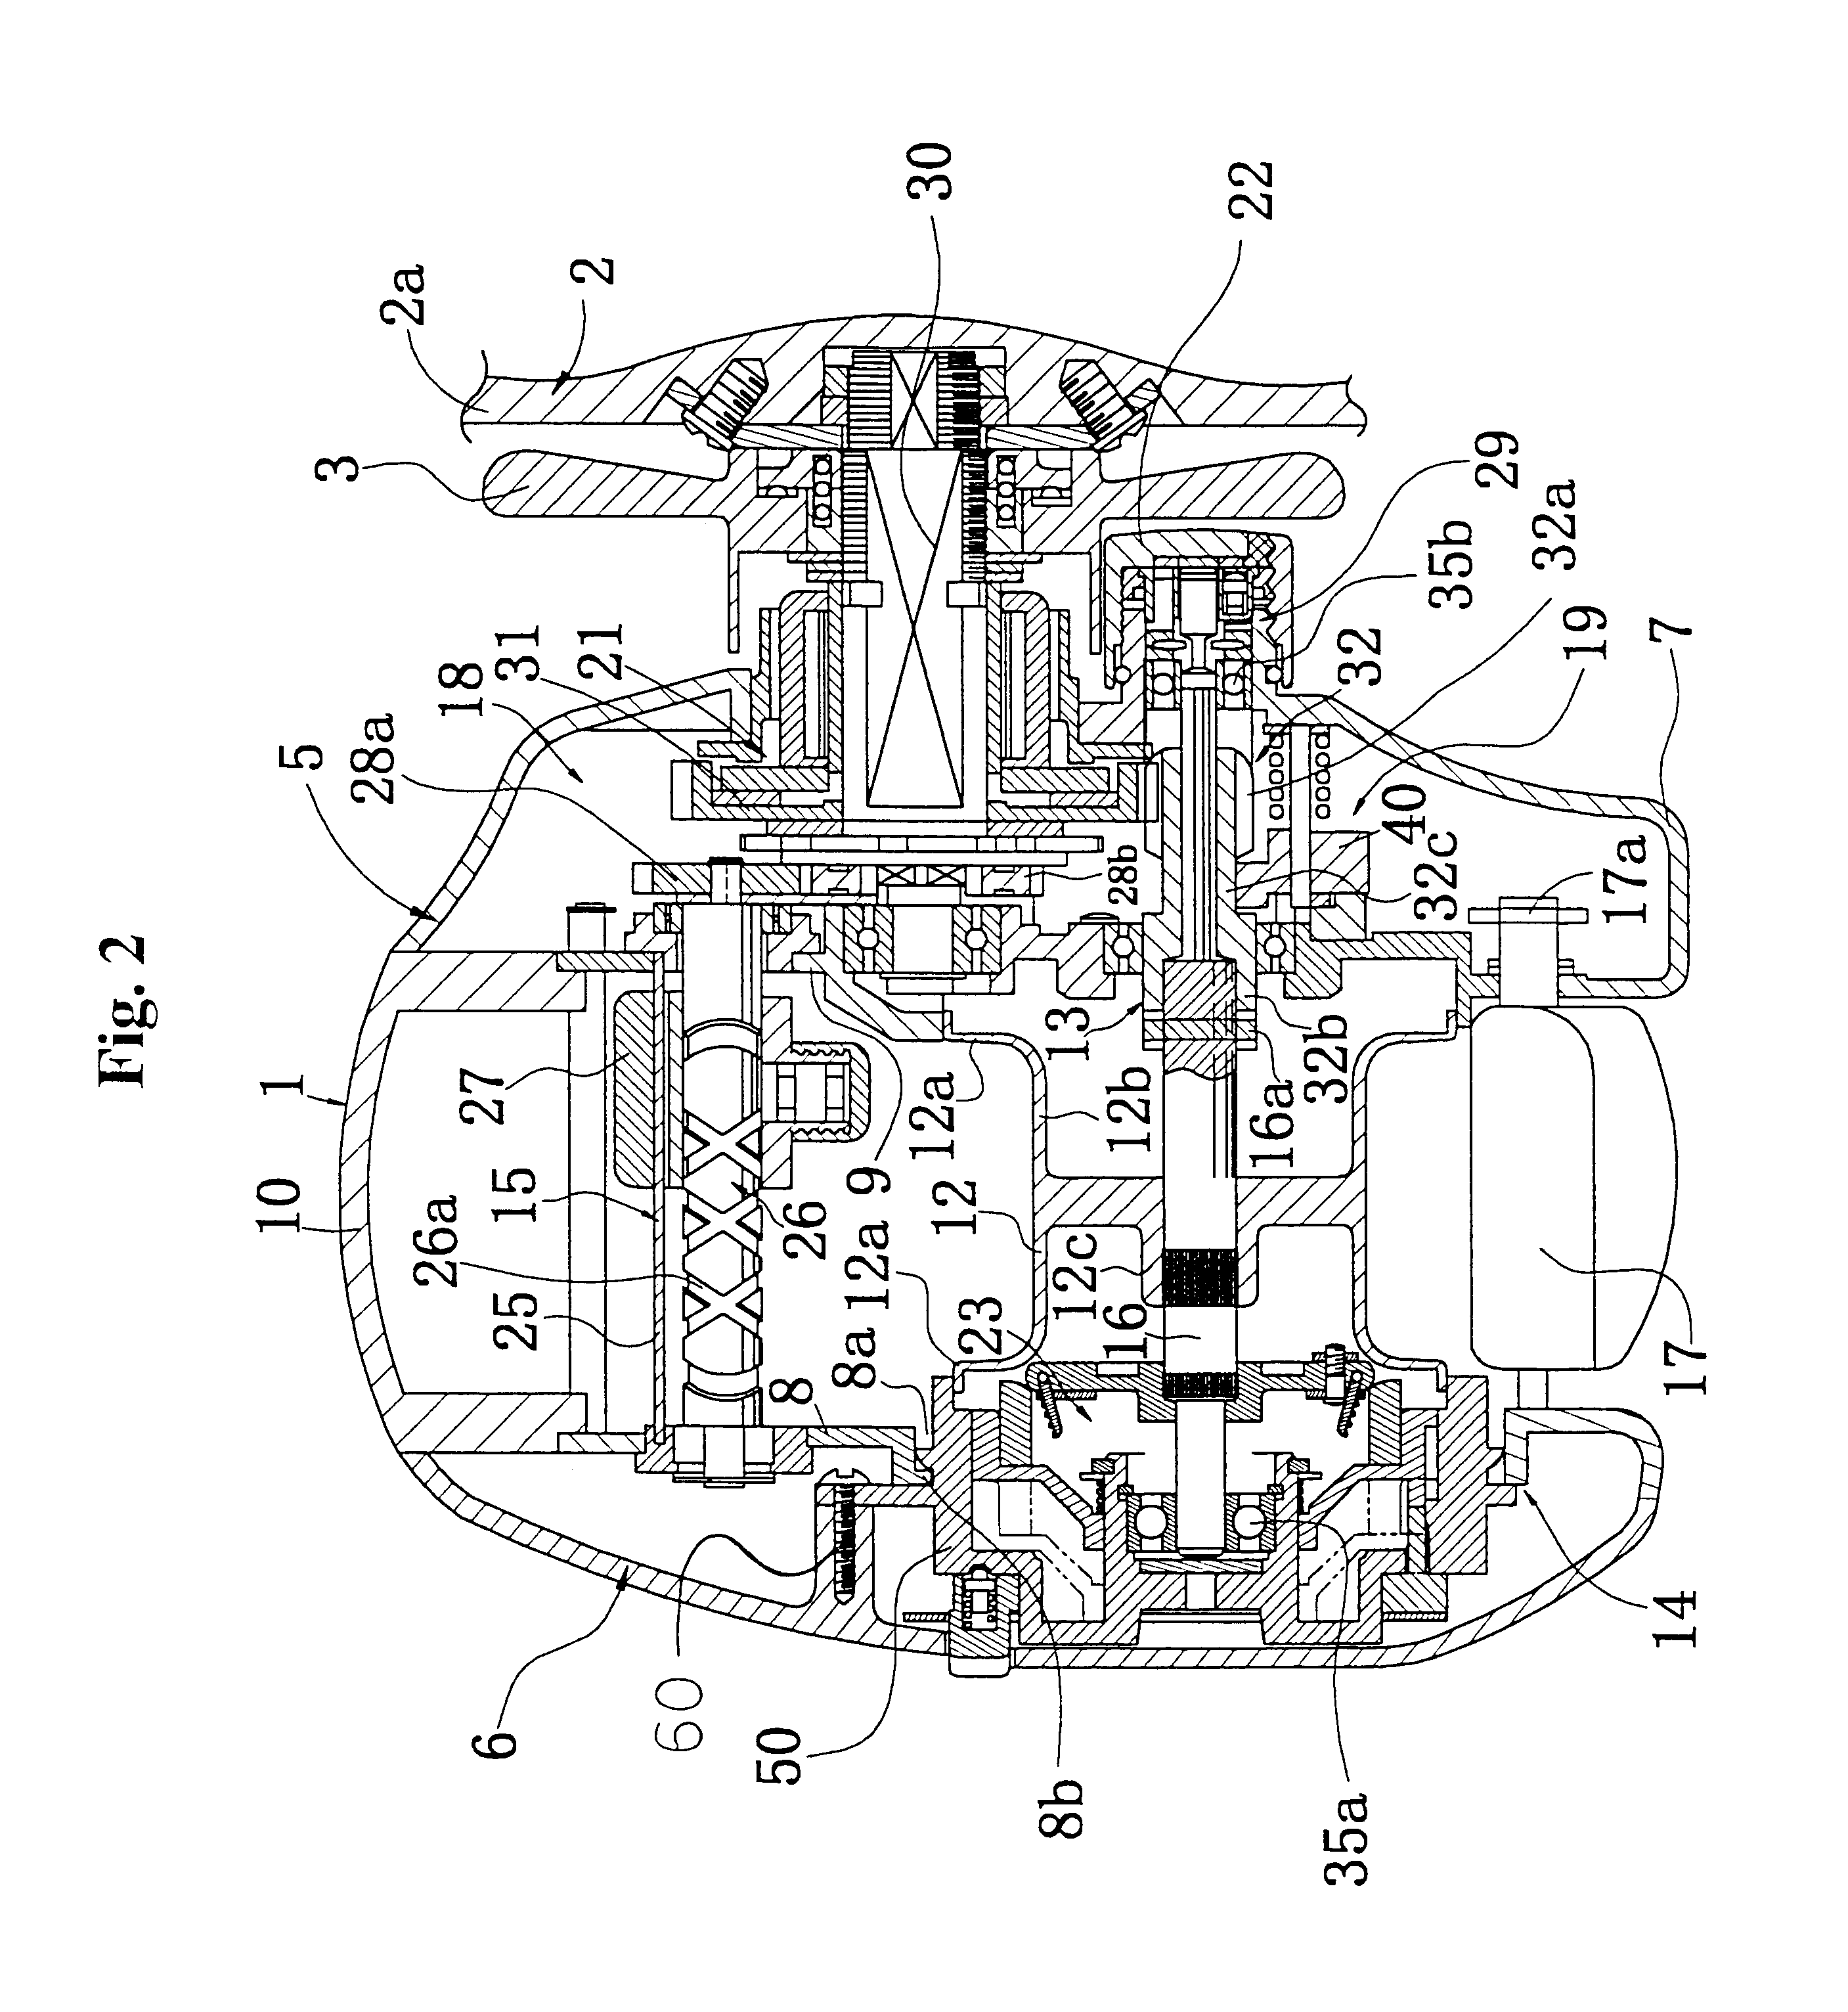 Centrifugal braking device for double bearing reel